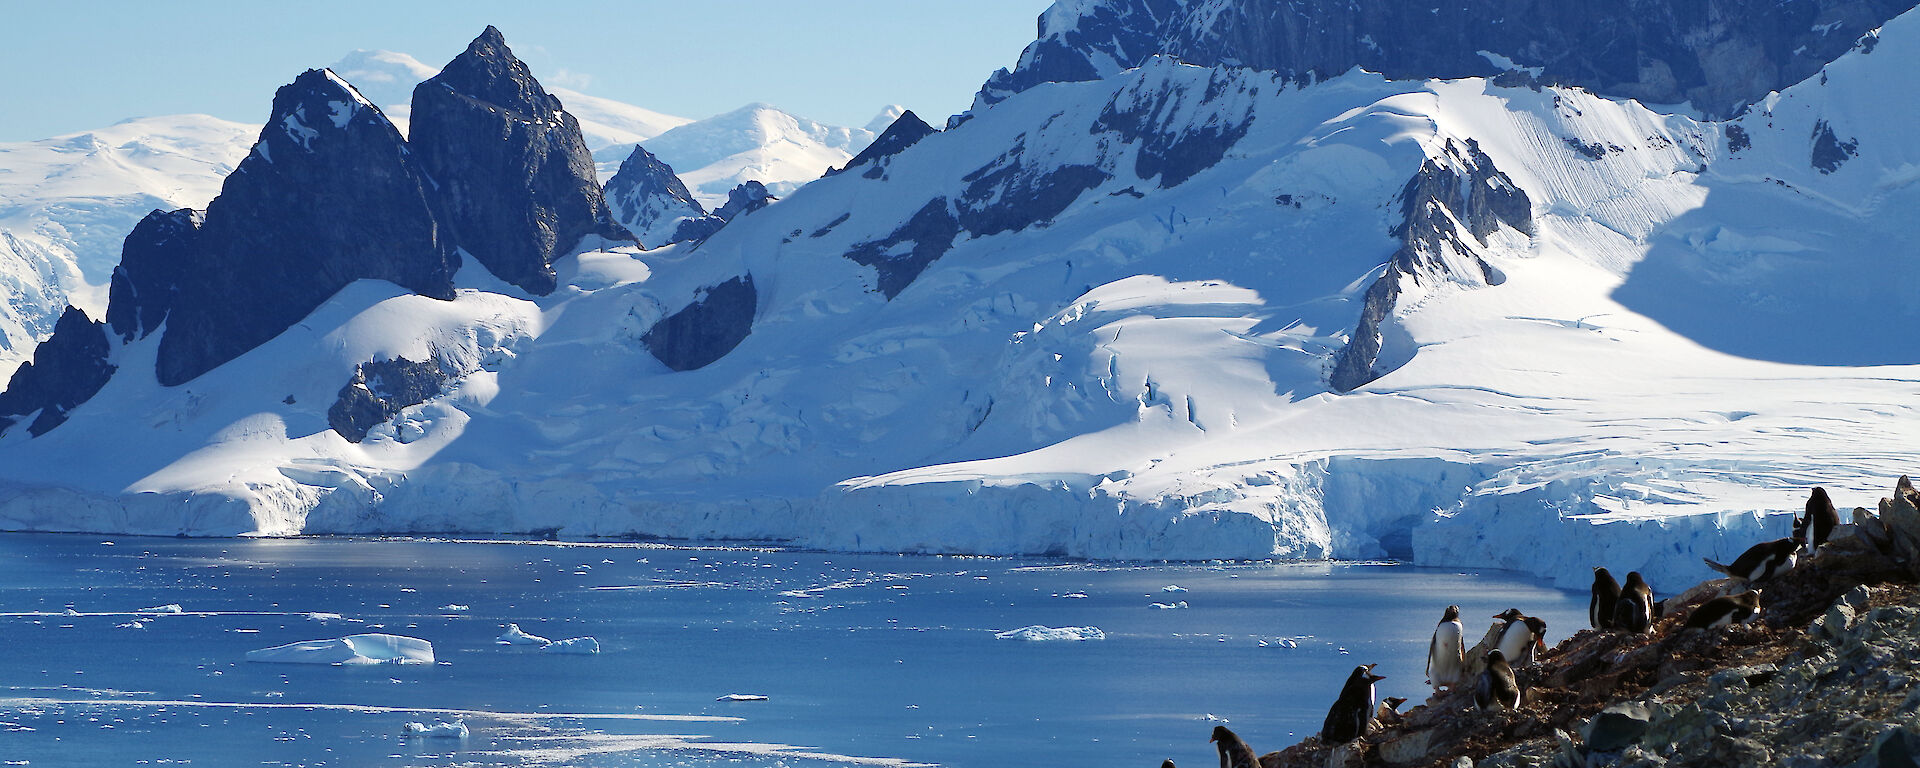 A penguin colony on the Antarctic Peninsula with rocky snow-capped peaks in the background.